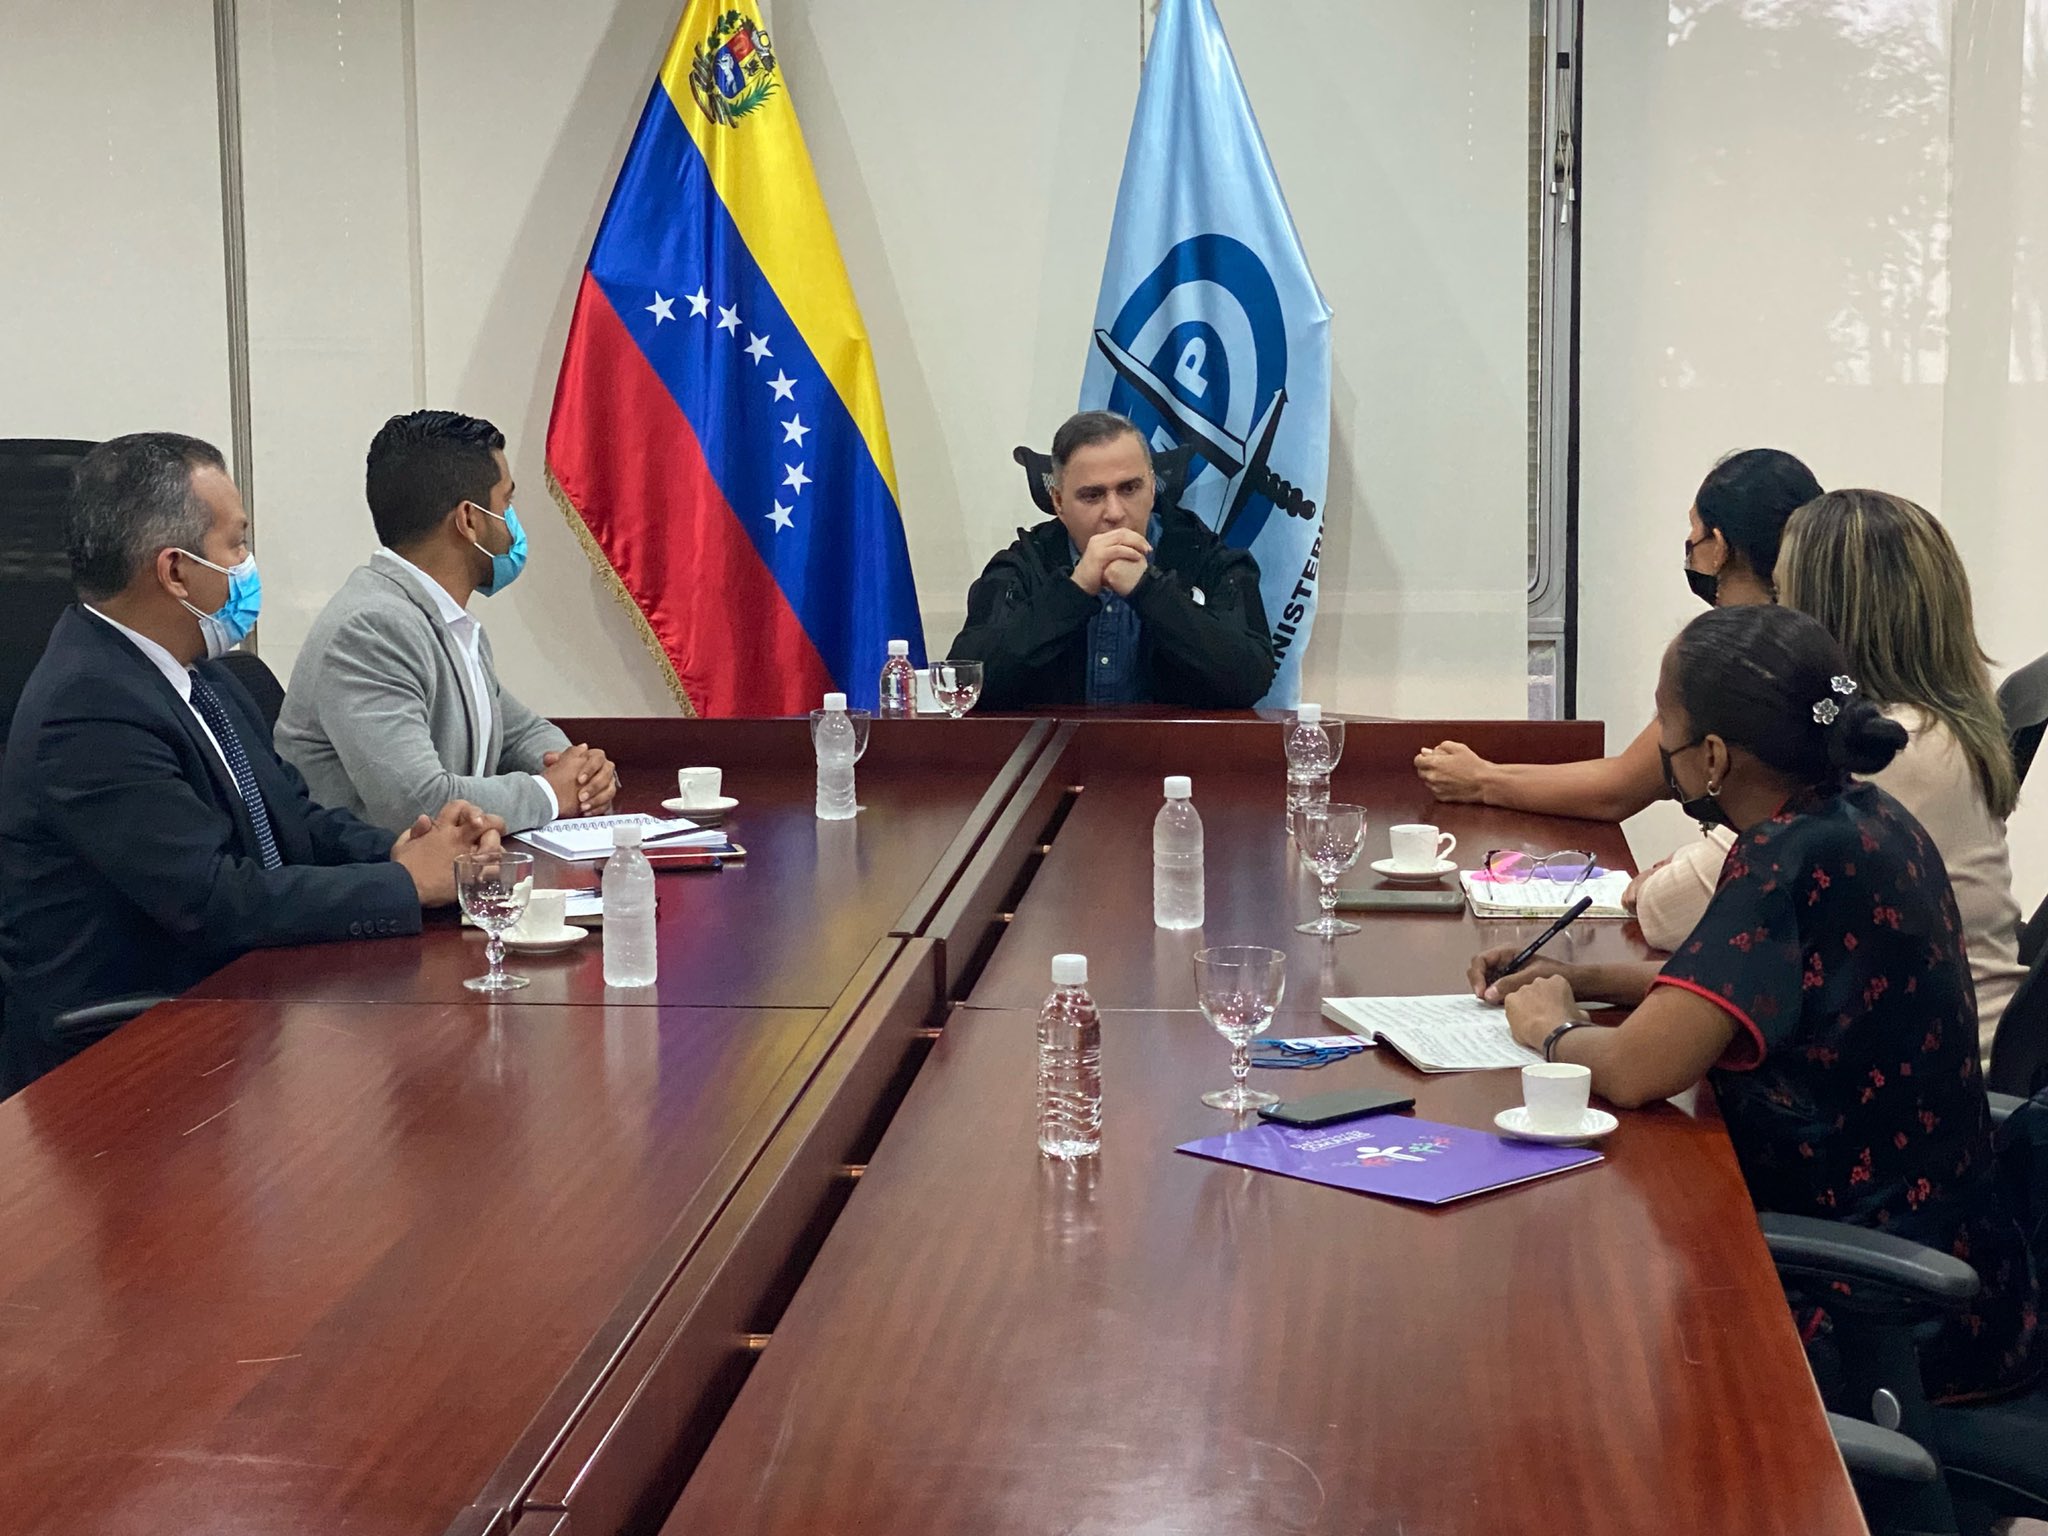 Saab held a meeting with relatives of a victim of femicide in Caracas